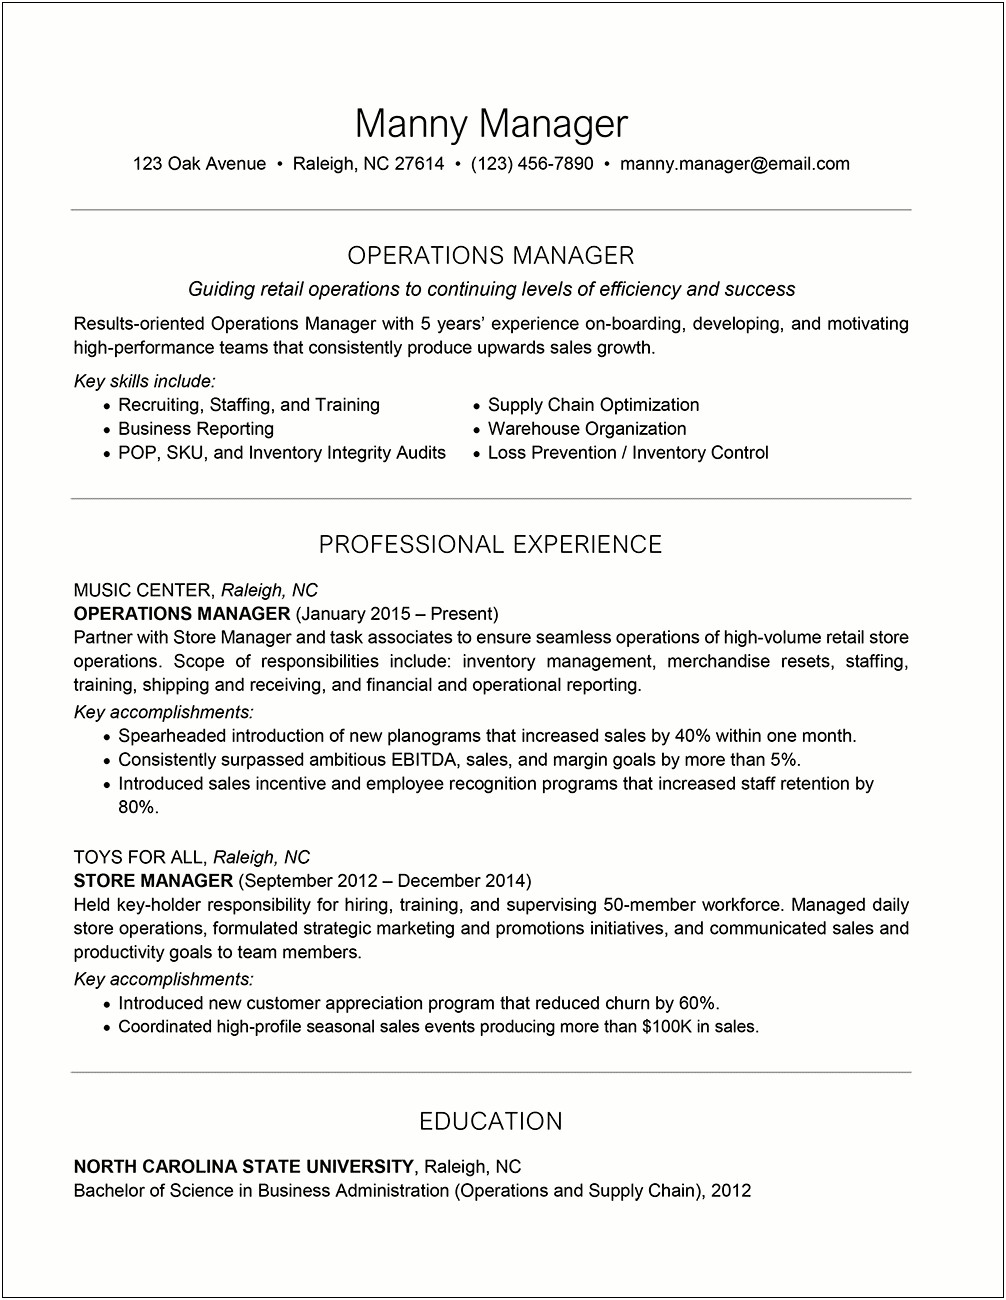 Resume Example For Management Job